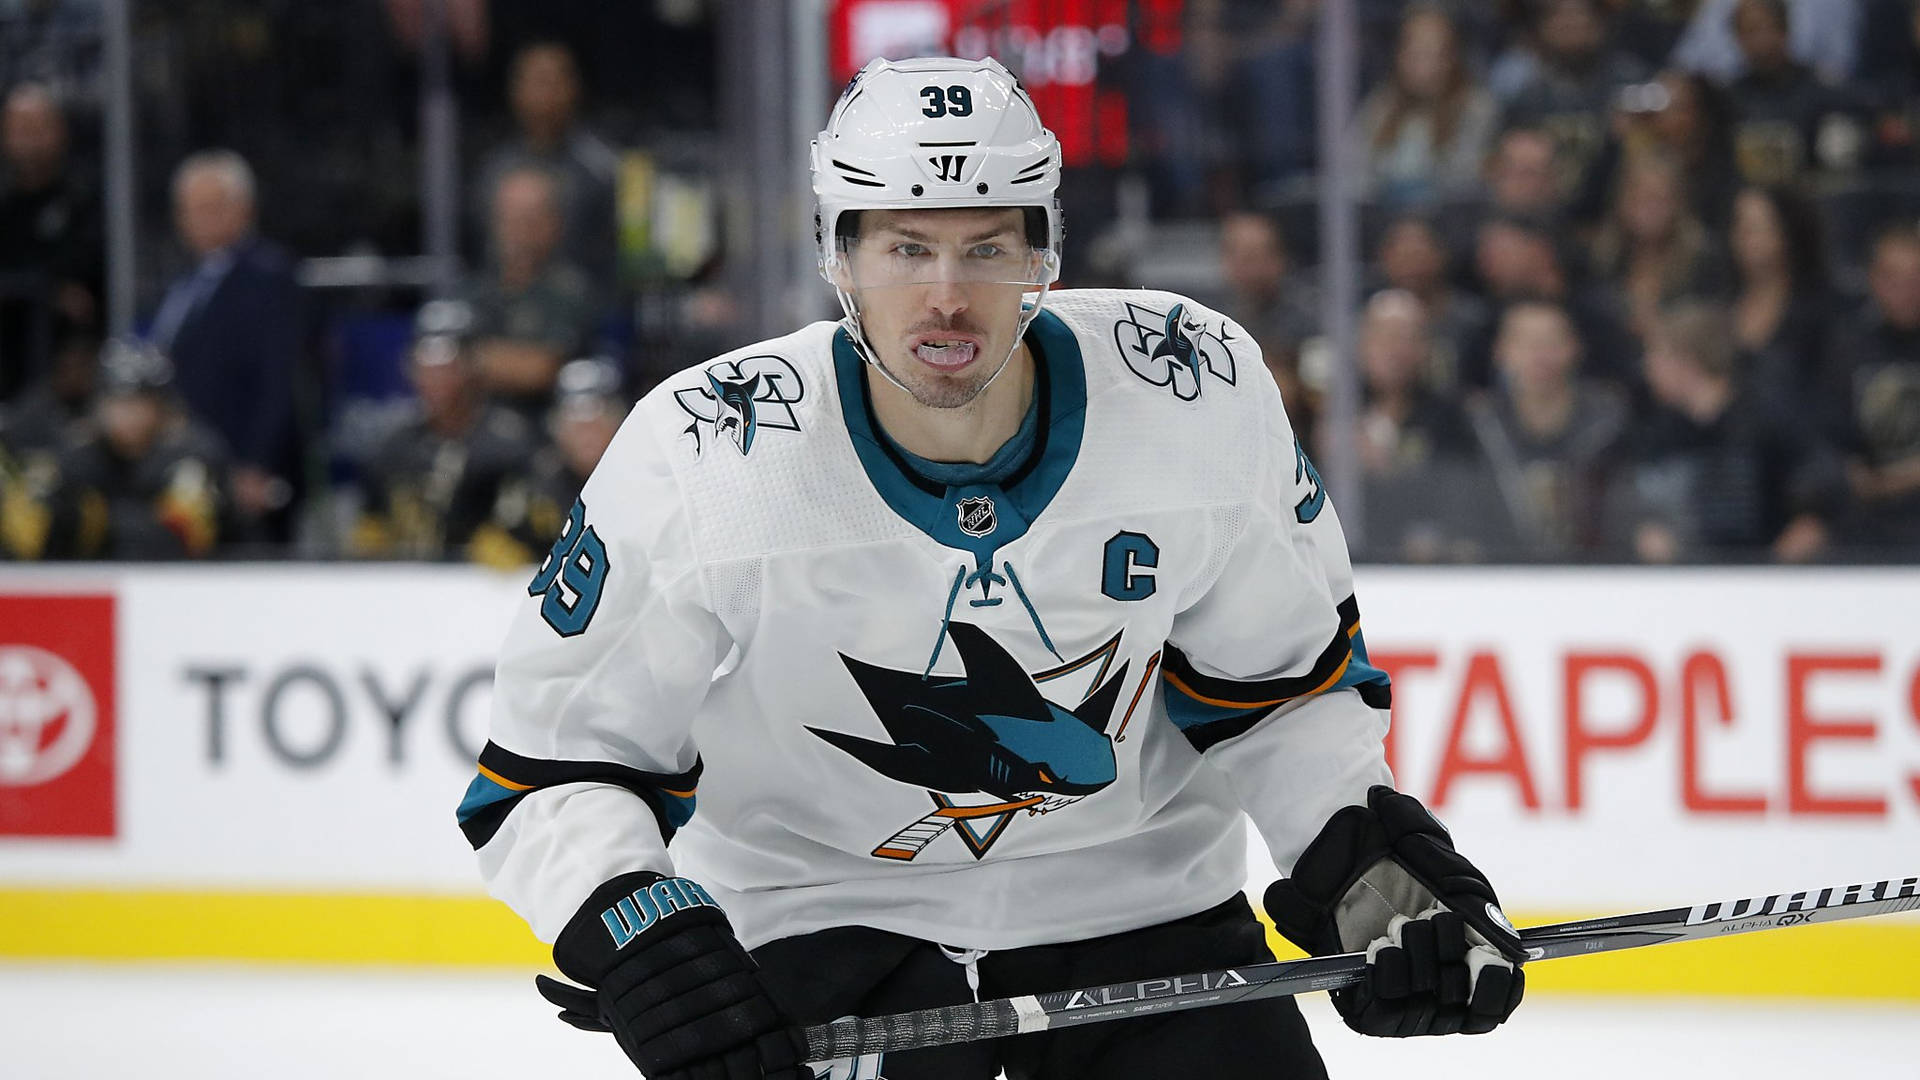 Canadisk professionel ishockey-spiller Logan Couture guarder Wallpaper